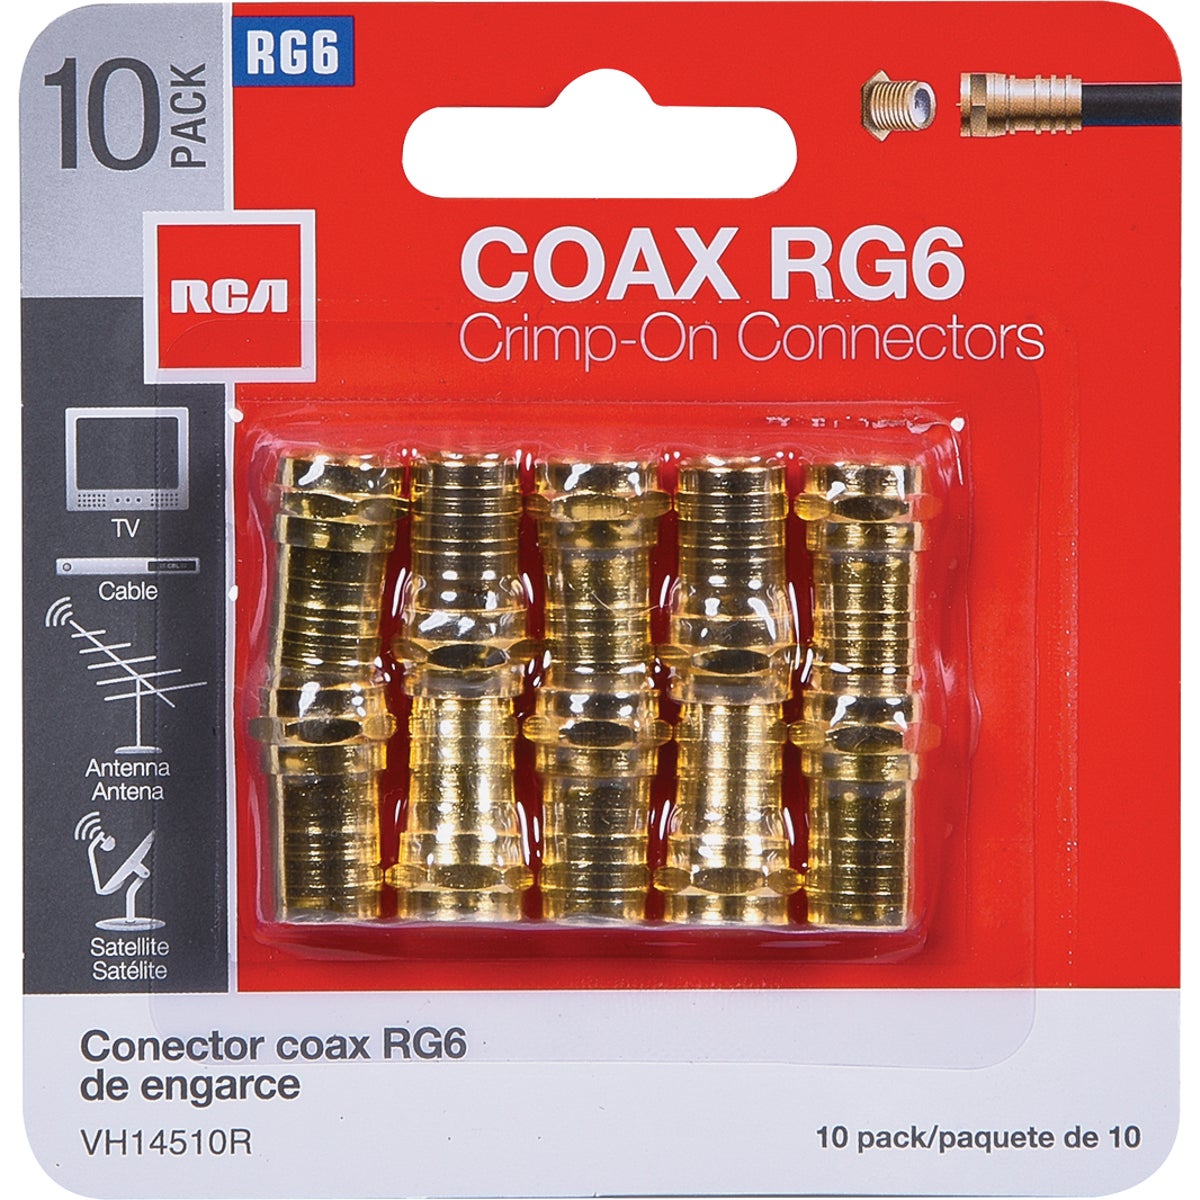 Item 524247, RG6 crimp-on gold-plated F-connectors in a convenient terminate RG6 coaxial